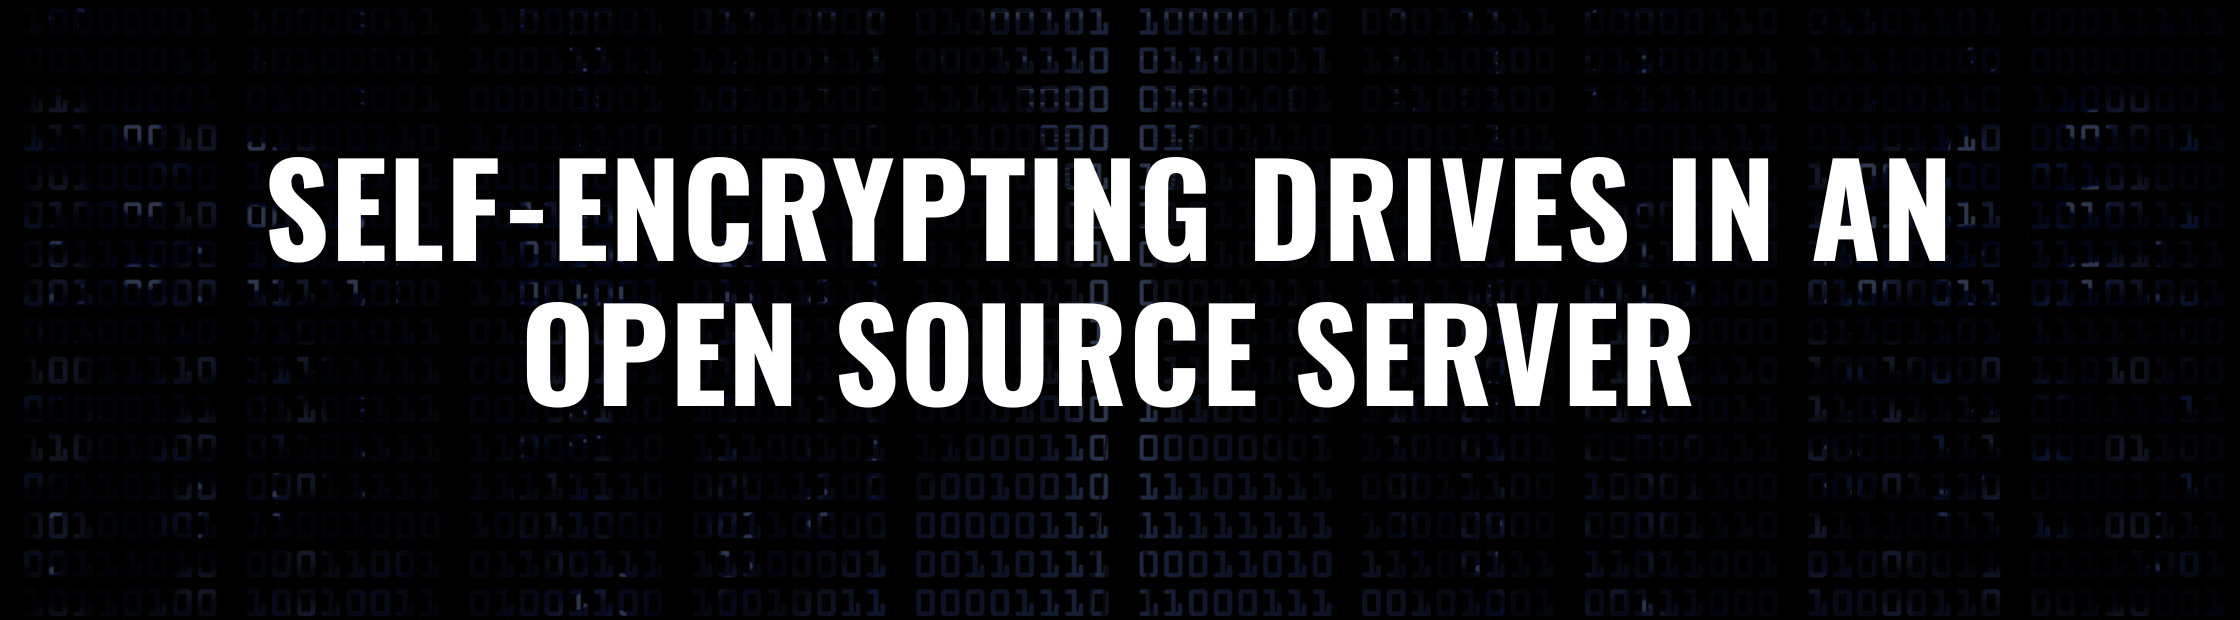 Self-Encrypting Drives, Open Source, Affordable Self Encrypting Drives, Encryption Data Storage